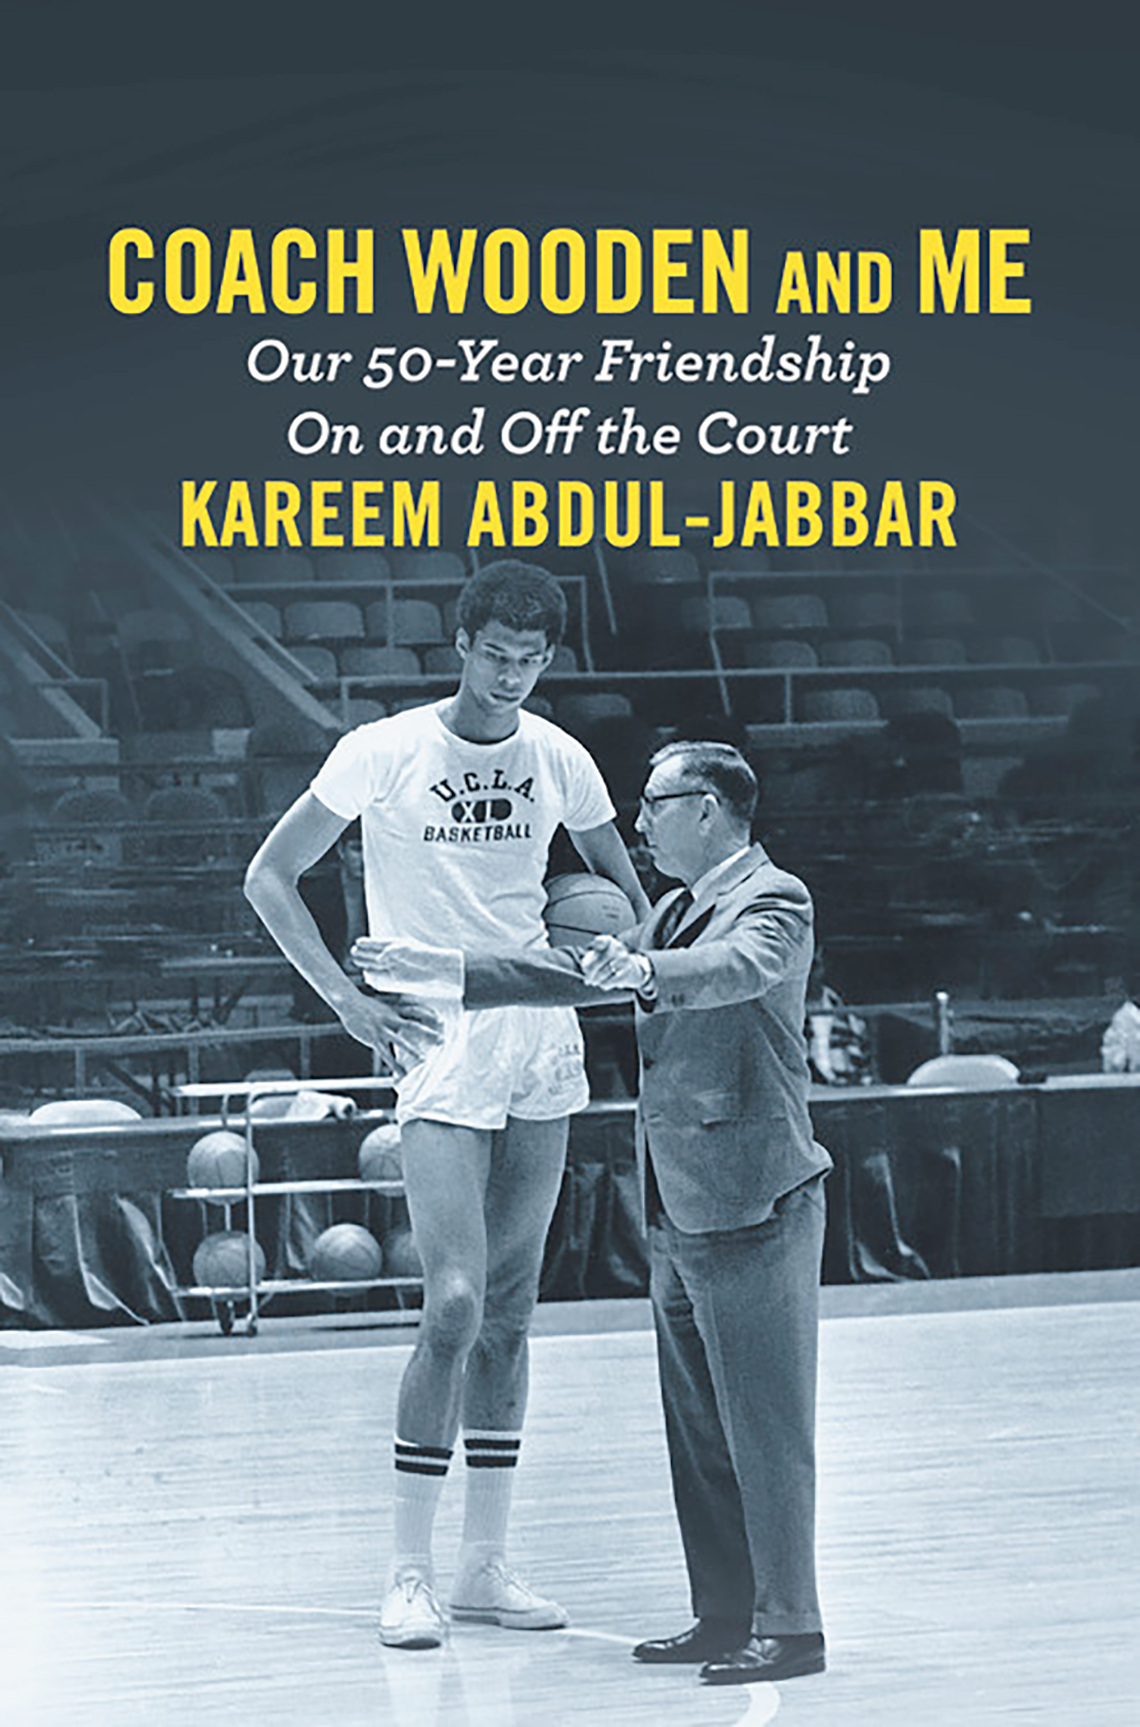 Coach Wooden and Me: Our 50-Year Friendship On and Off the Court, by Kareem Abdul-Jabbar